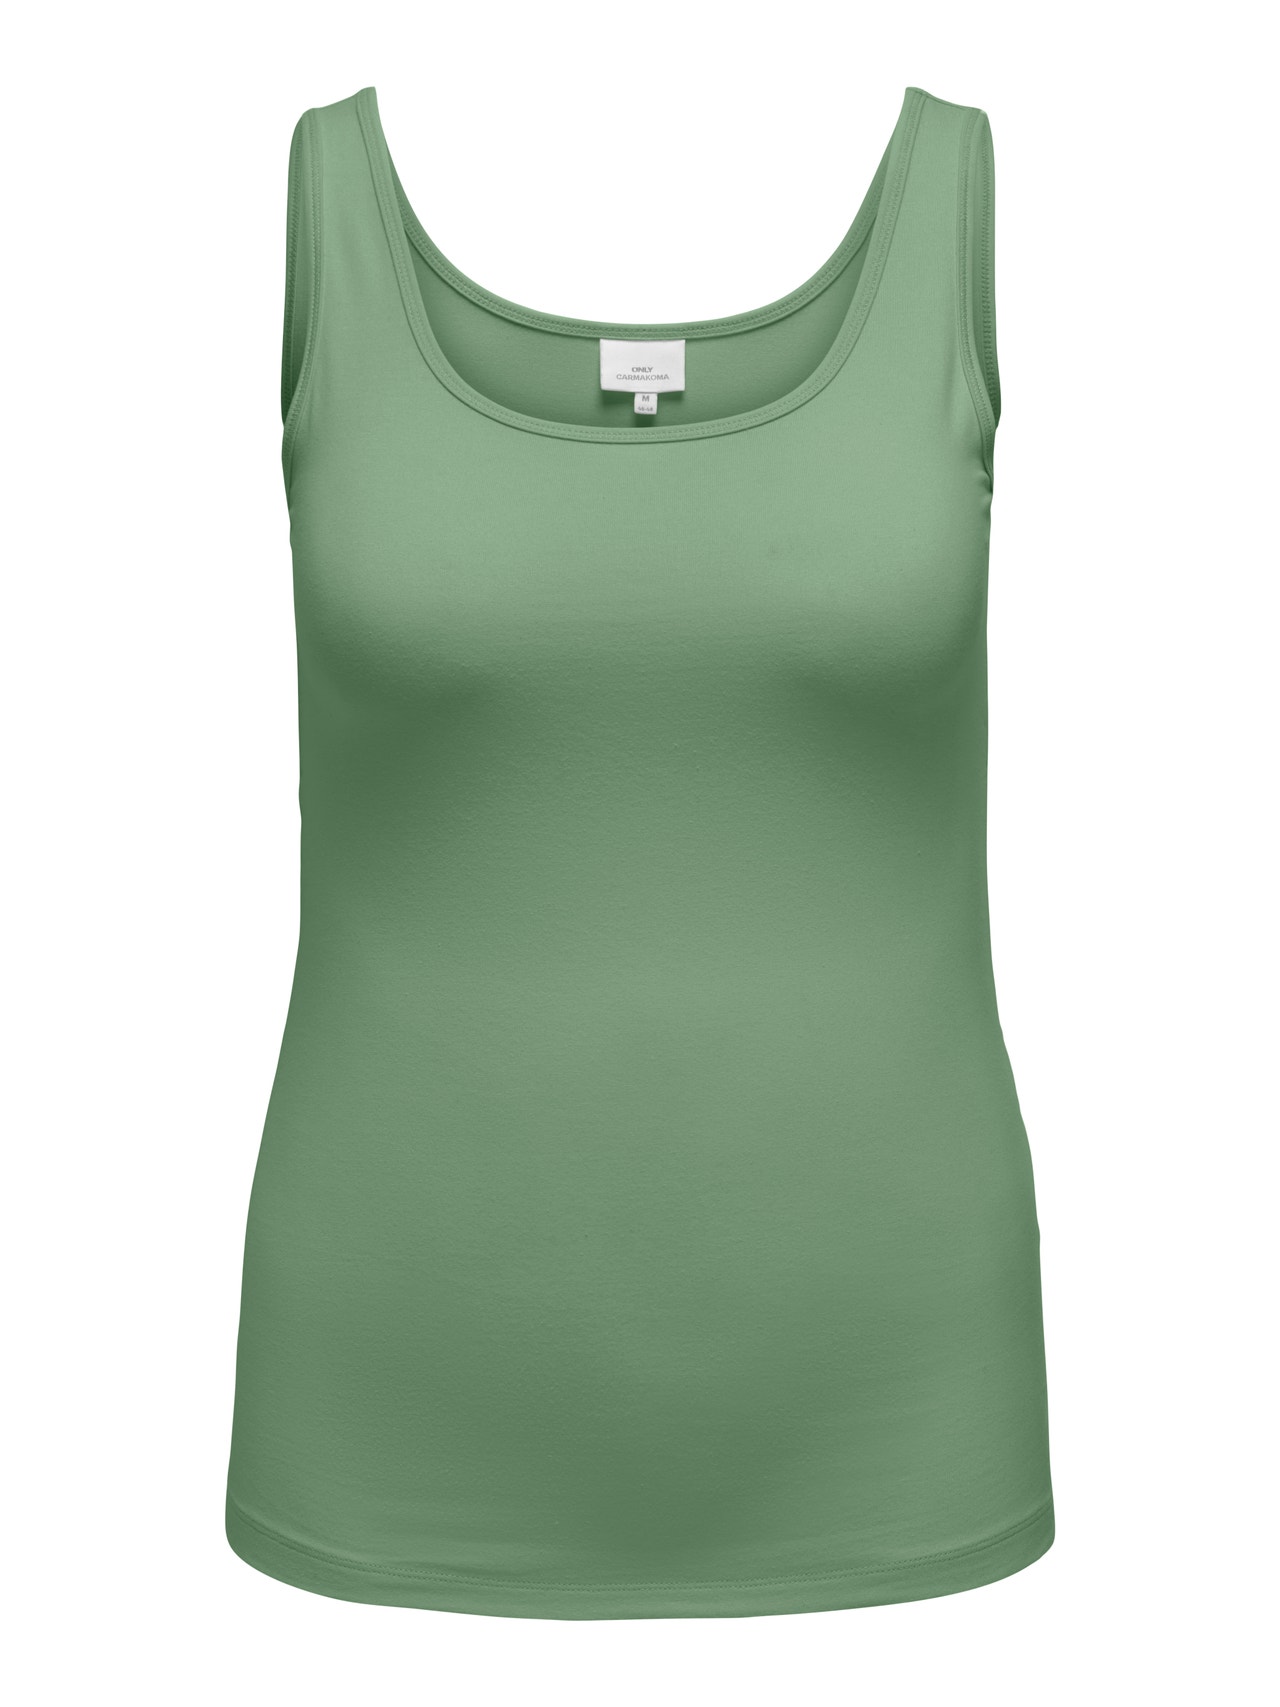 ONLY Curvy basis Tanktop -Hedge Green - 15188036